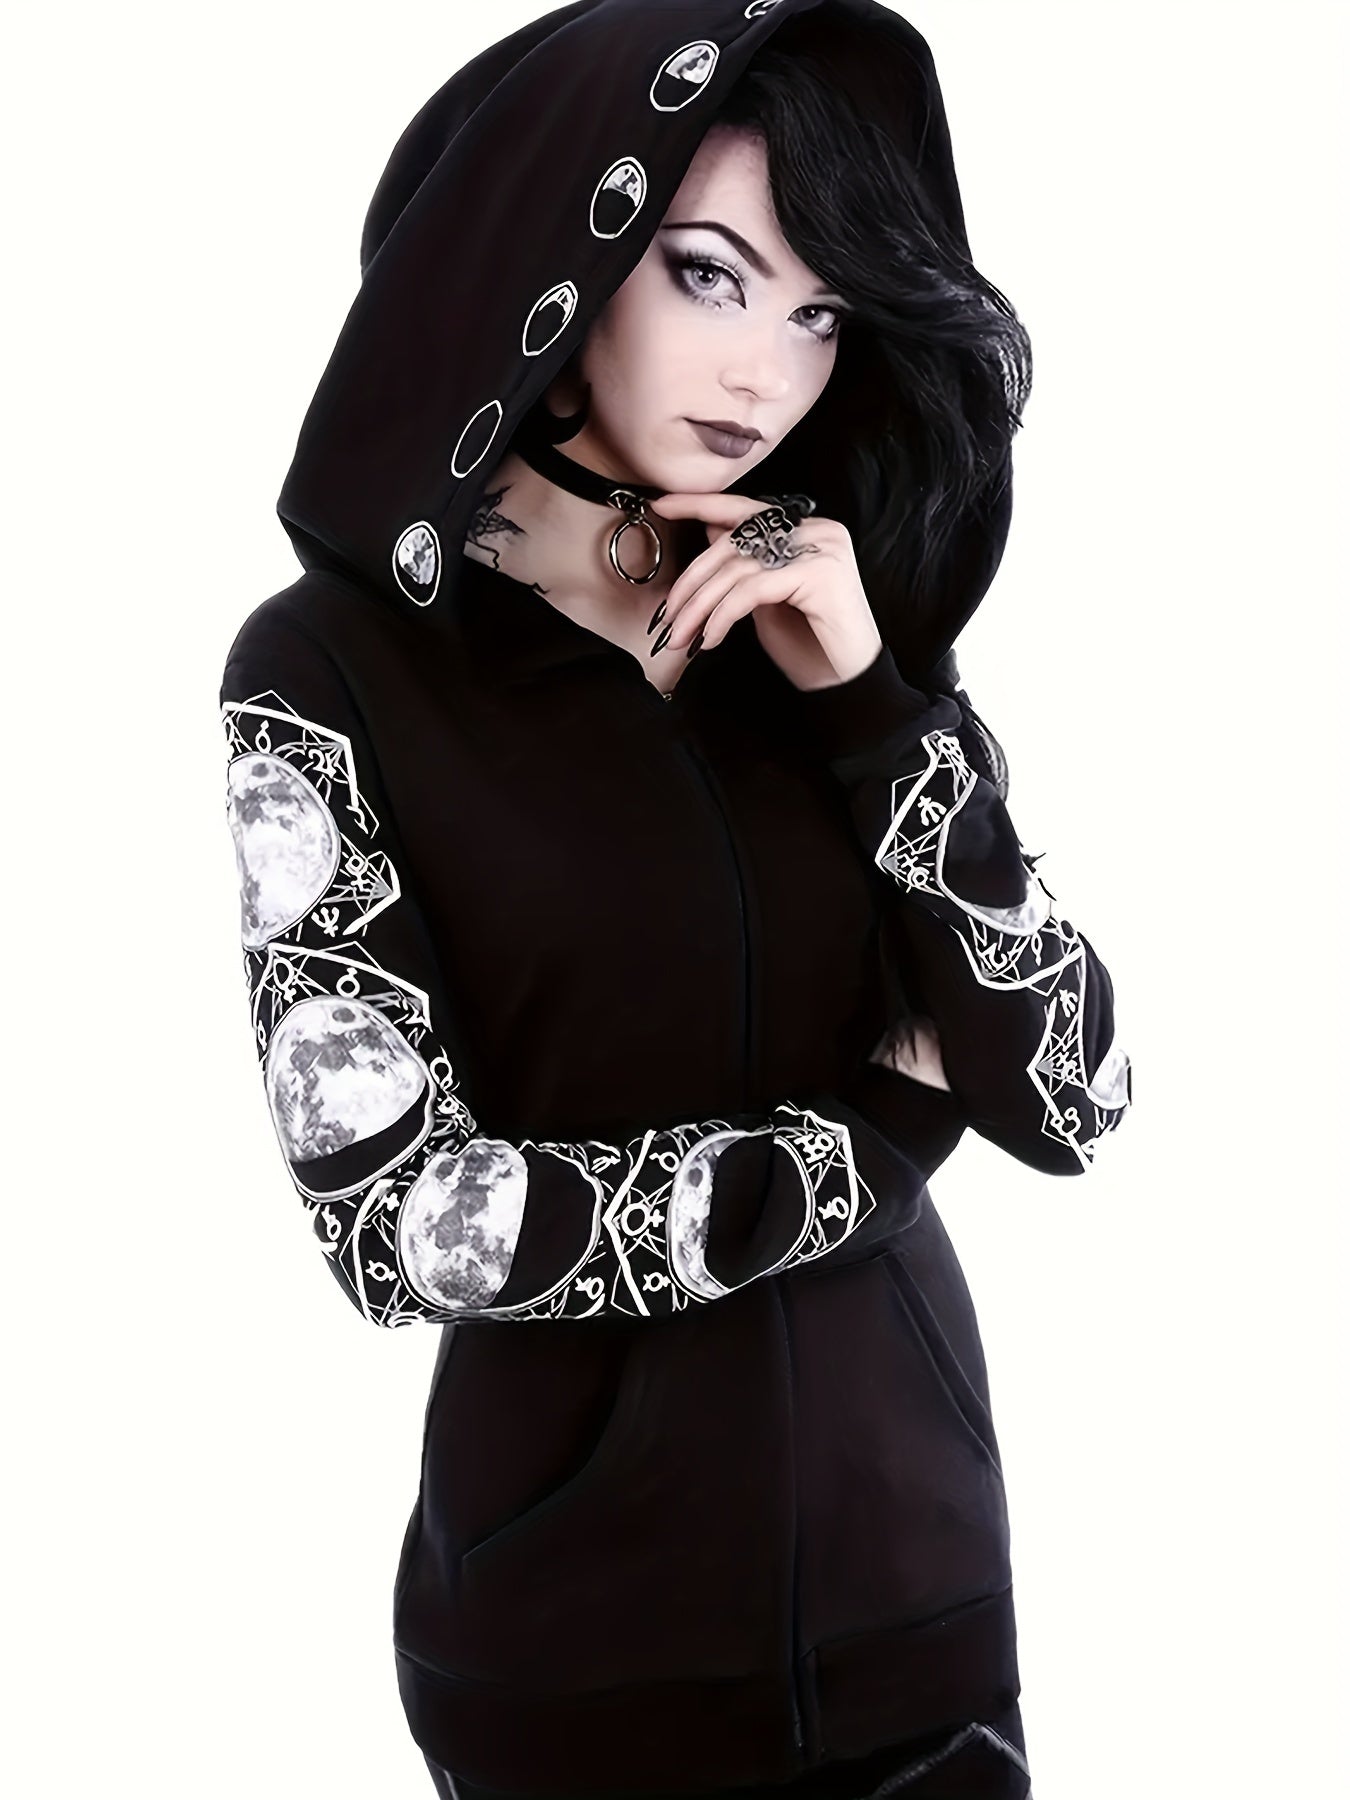 Person wearing a Maramalive™ Plus Size Gothic Sweatshirt, Women's Plus Moon Print Long Sleeve Zipper Slight Stretch Hoodie With Pockets with dark hair and makeup, standing casually against a white background.